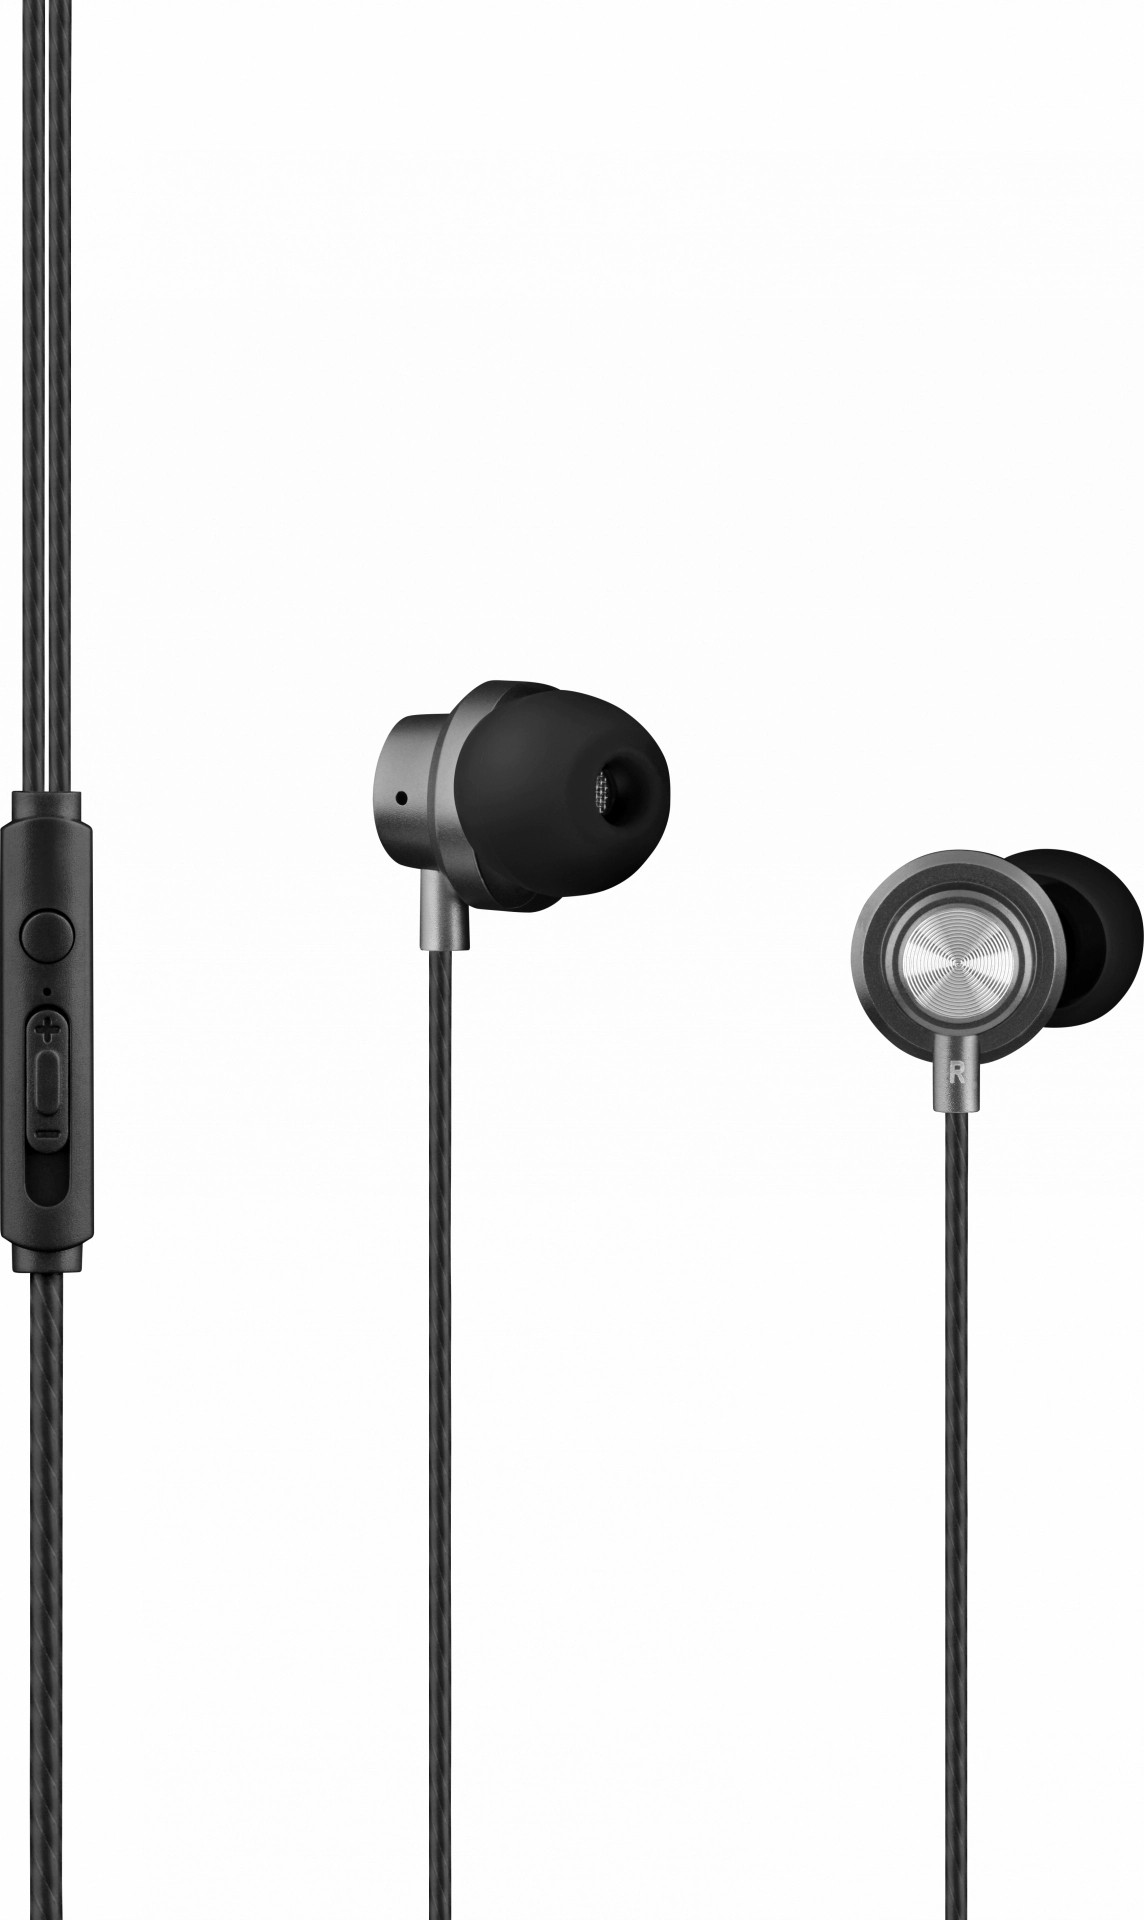 The G-Lab Helium Gaming Earphones with Remote Control and Pouch - Black